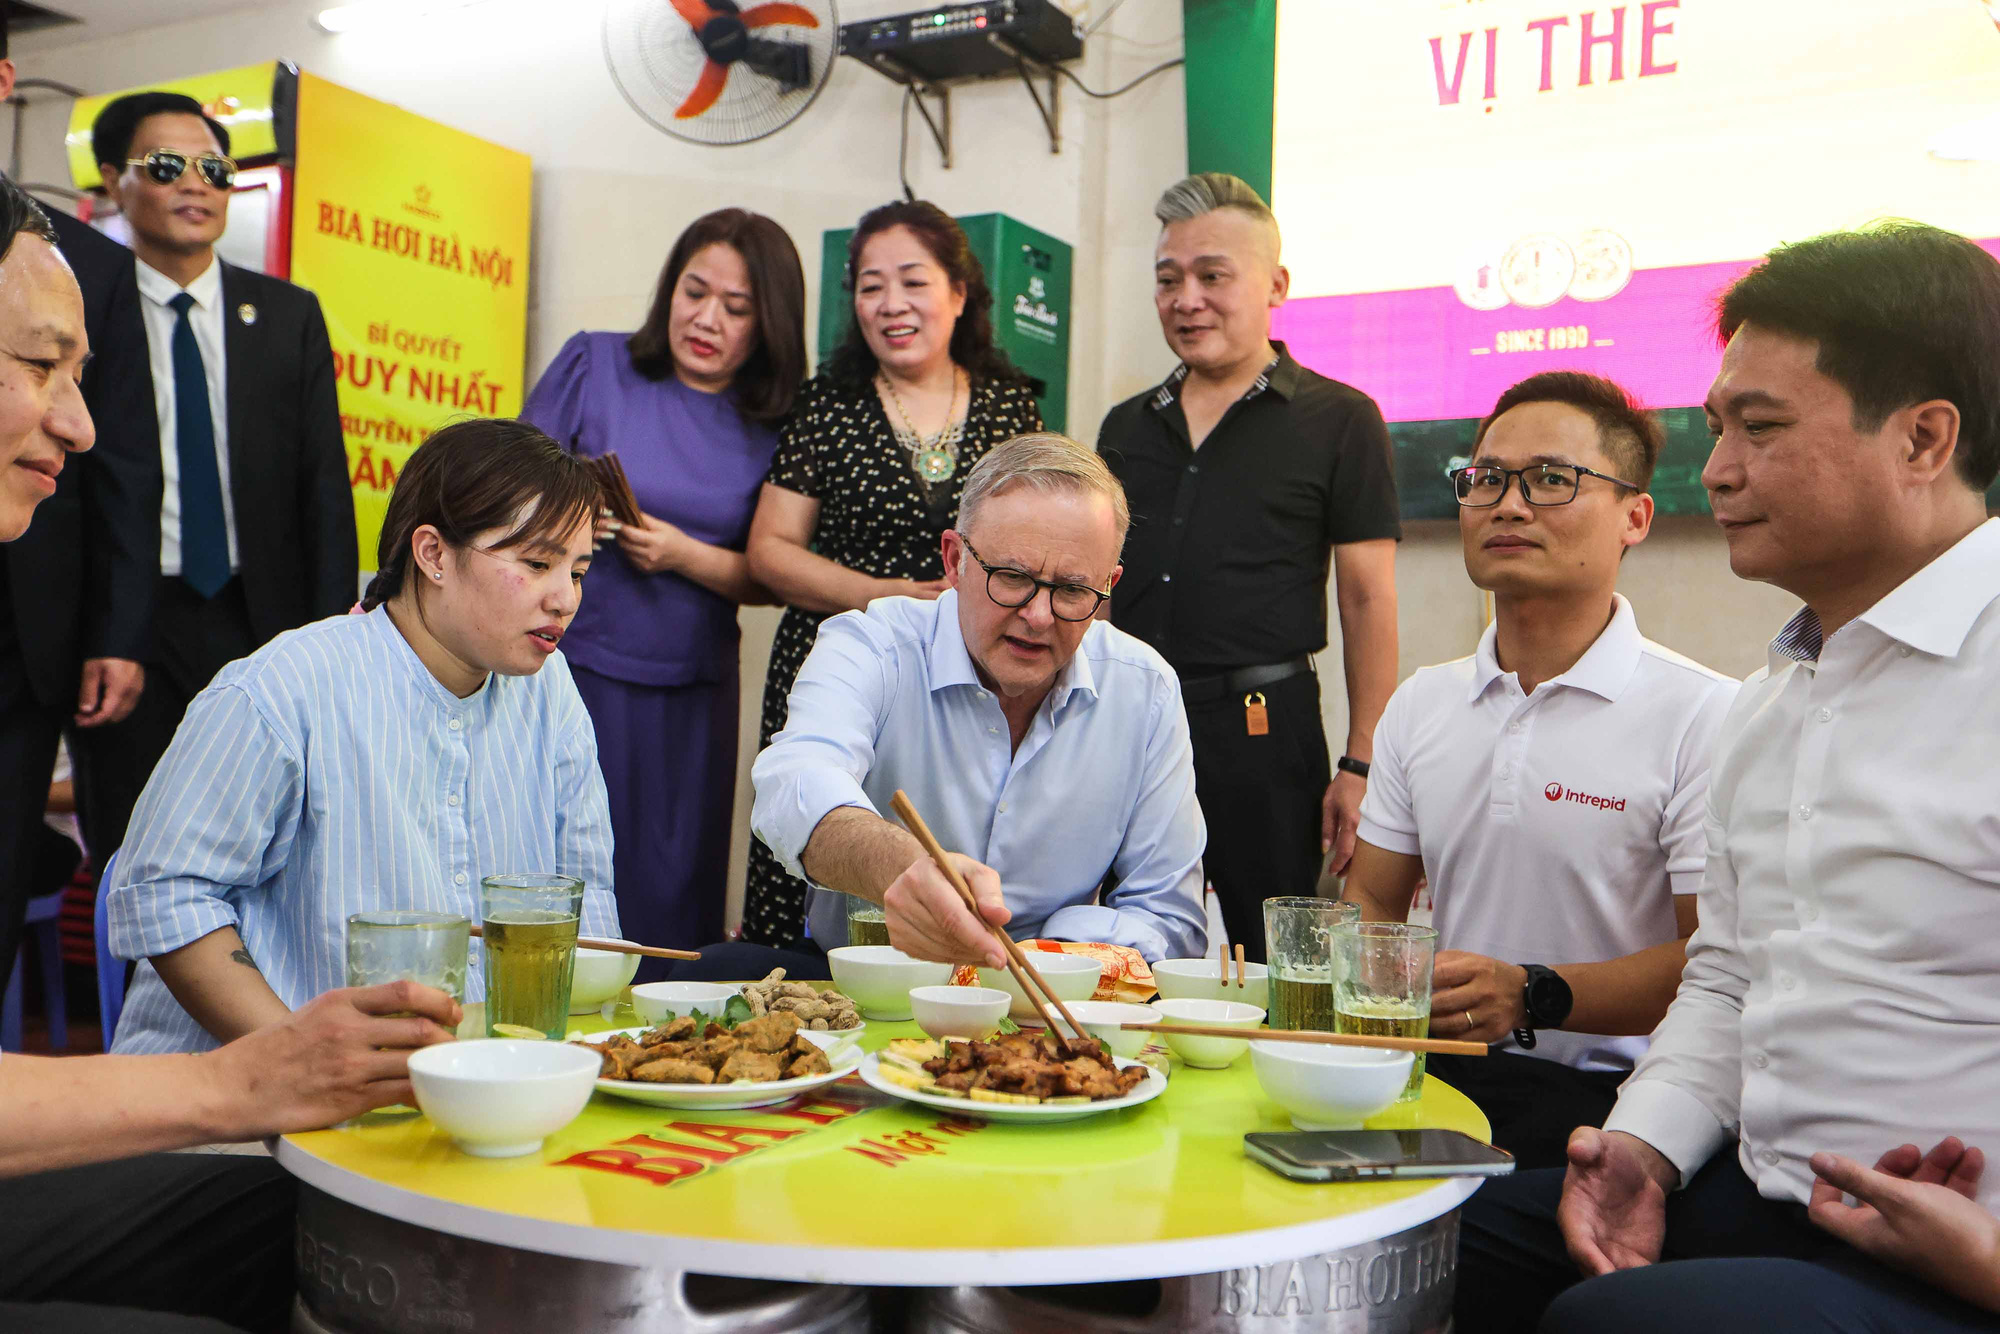 The head of the Australian government enjoys local delicacies served with draft beer